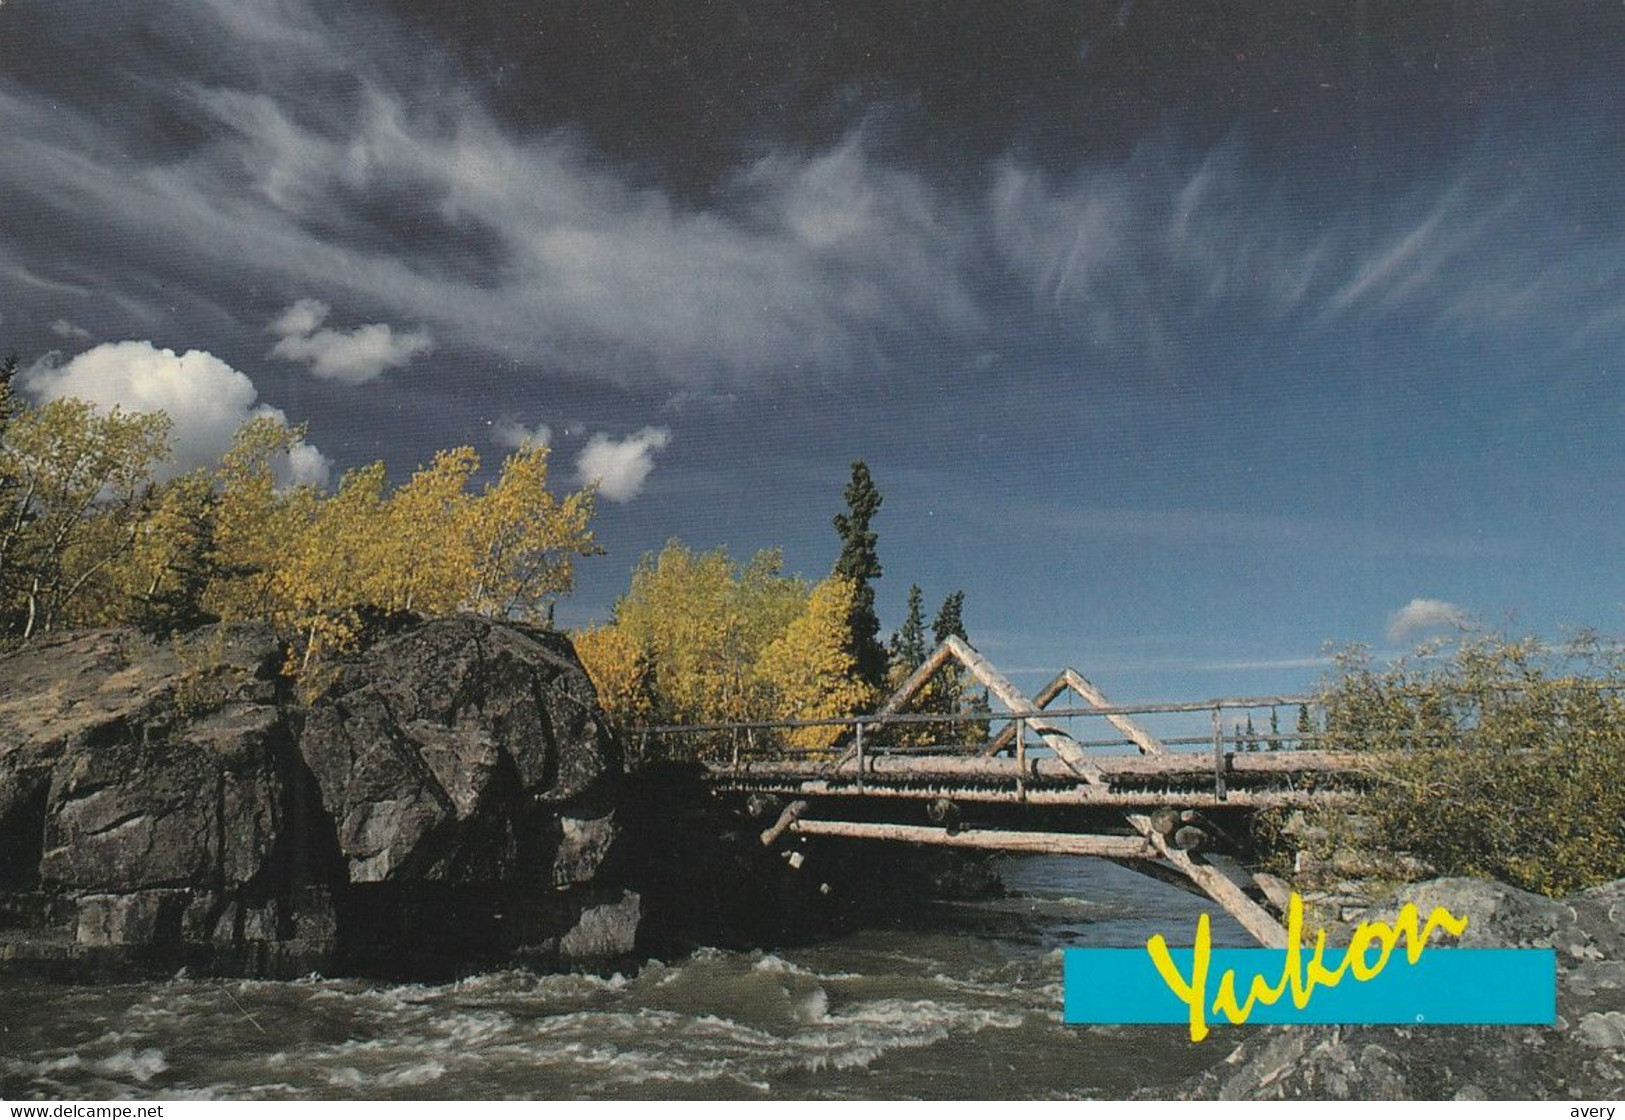 Yukon The Canyon Creek Bridge Formed An Important Link In The Wagon Road Between Whitehorse And The Kluane Area - Yukon